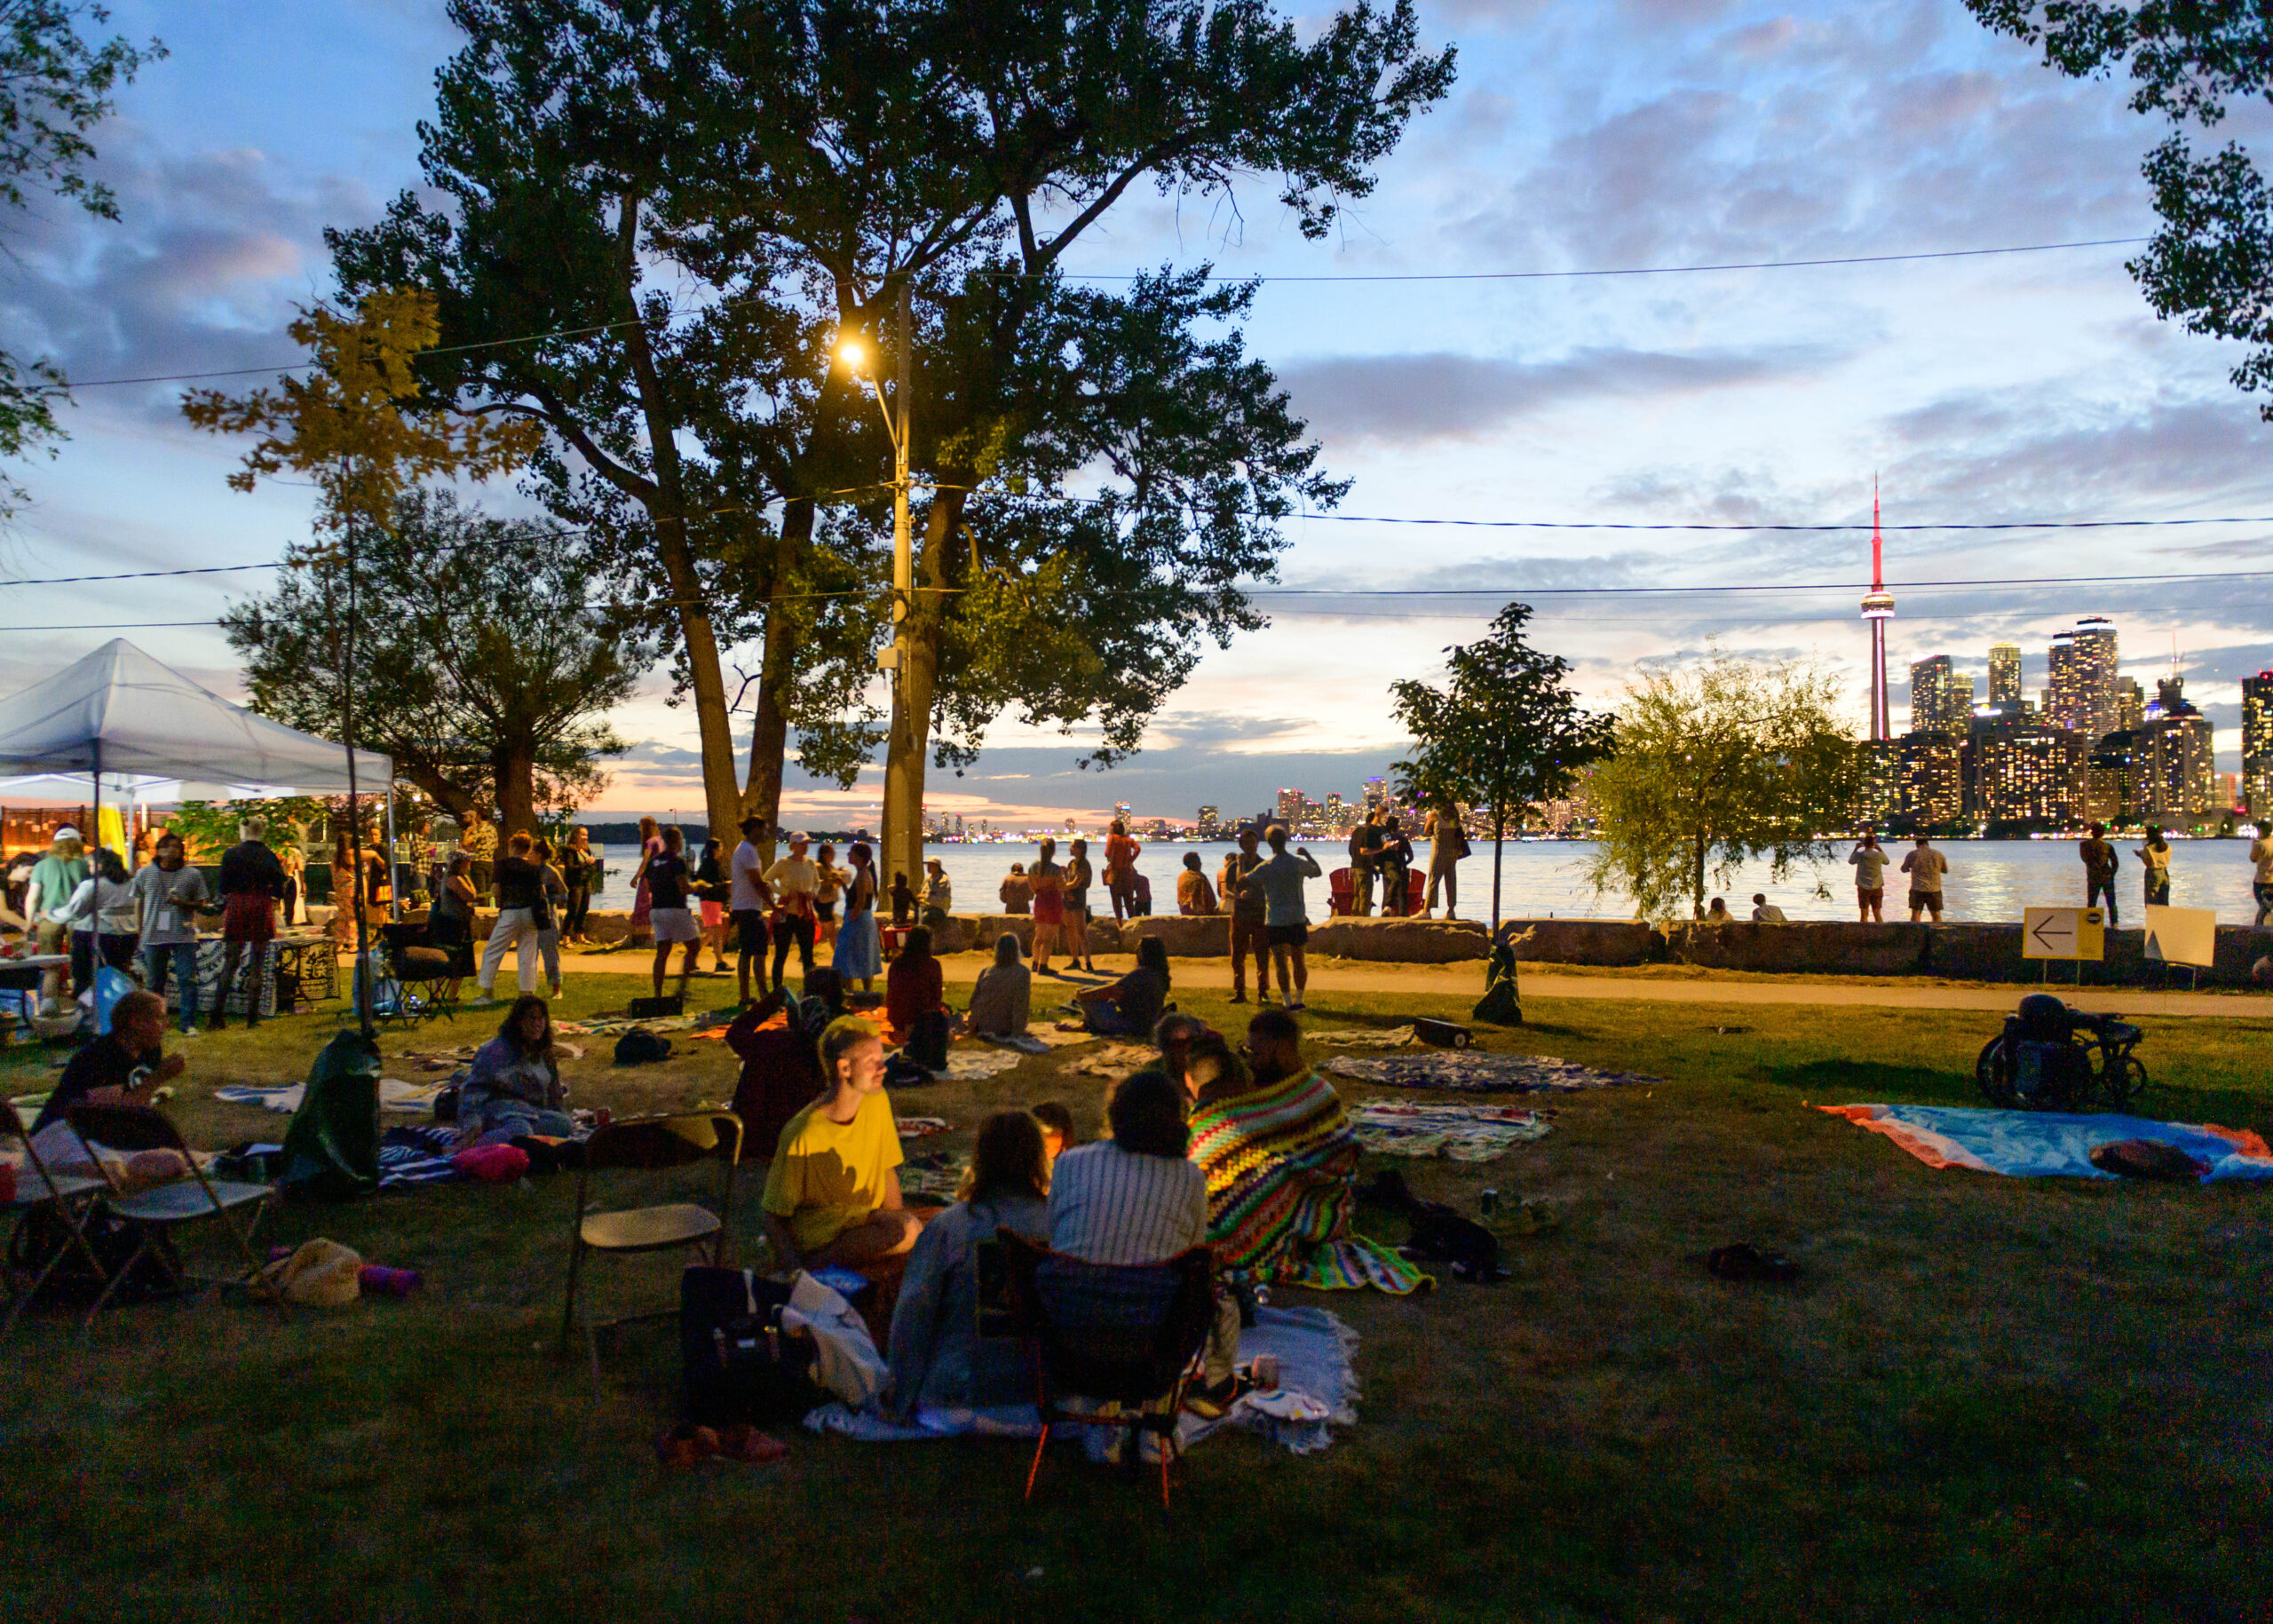 An outdoor gathering at sunset with people sitting on blankets on the grass by a large tree and the CN Tower in the distance.